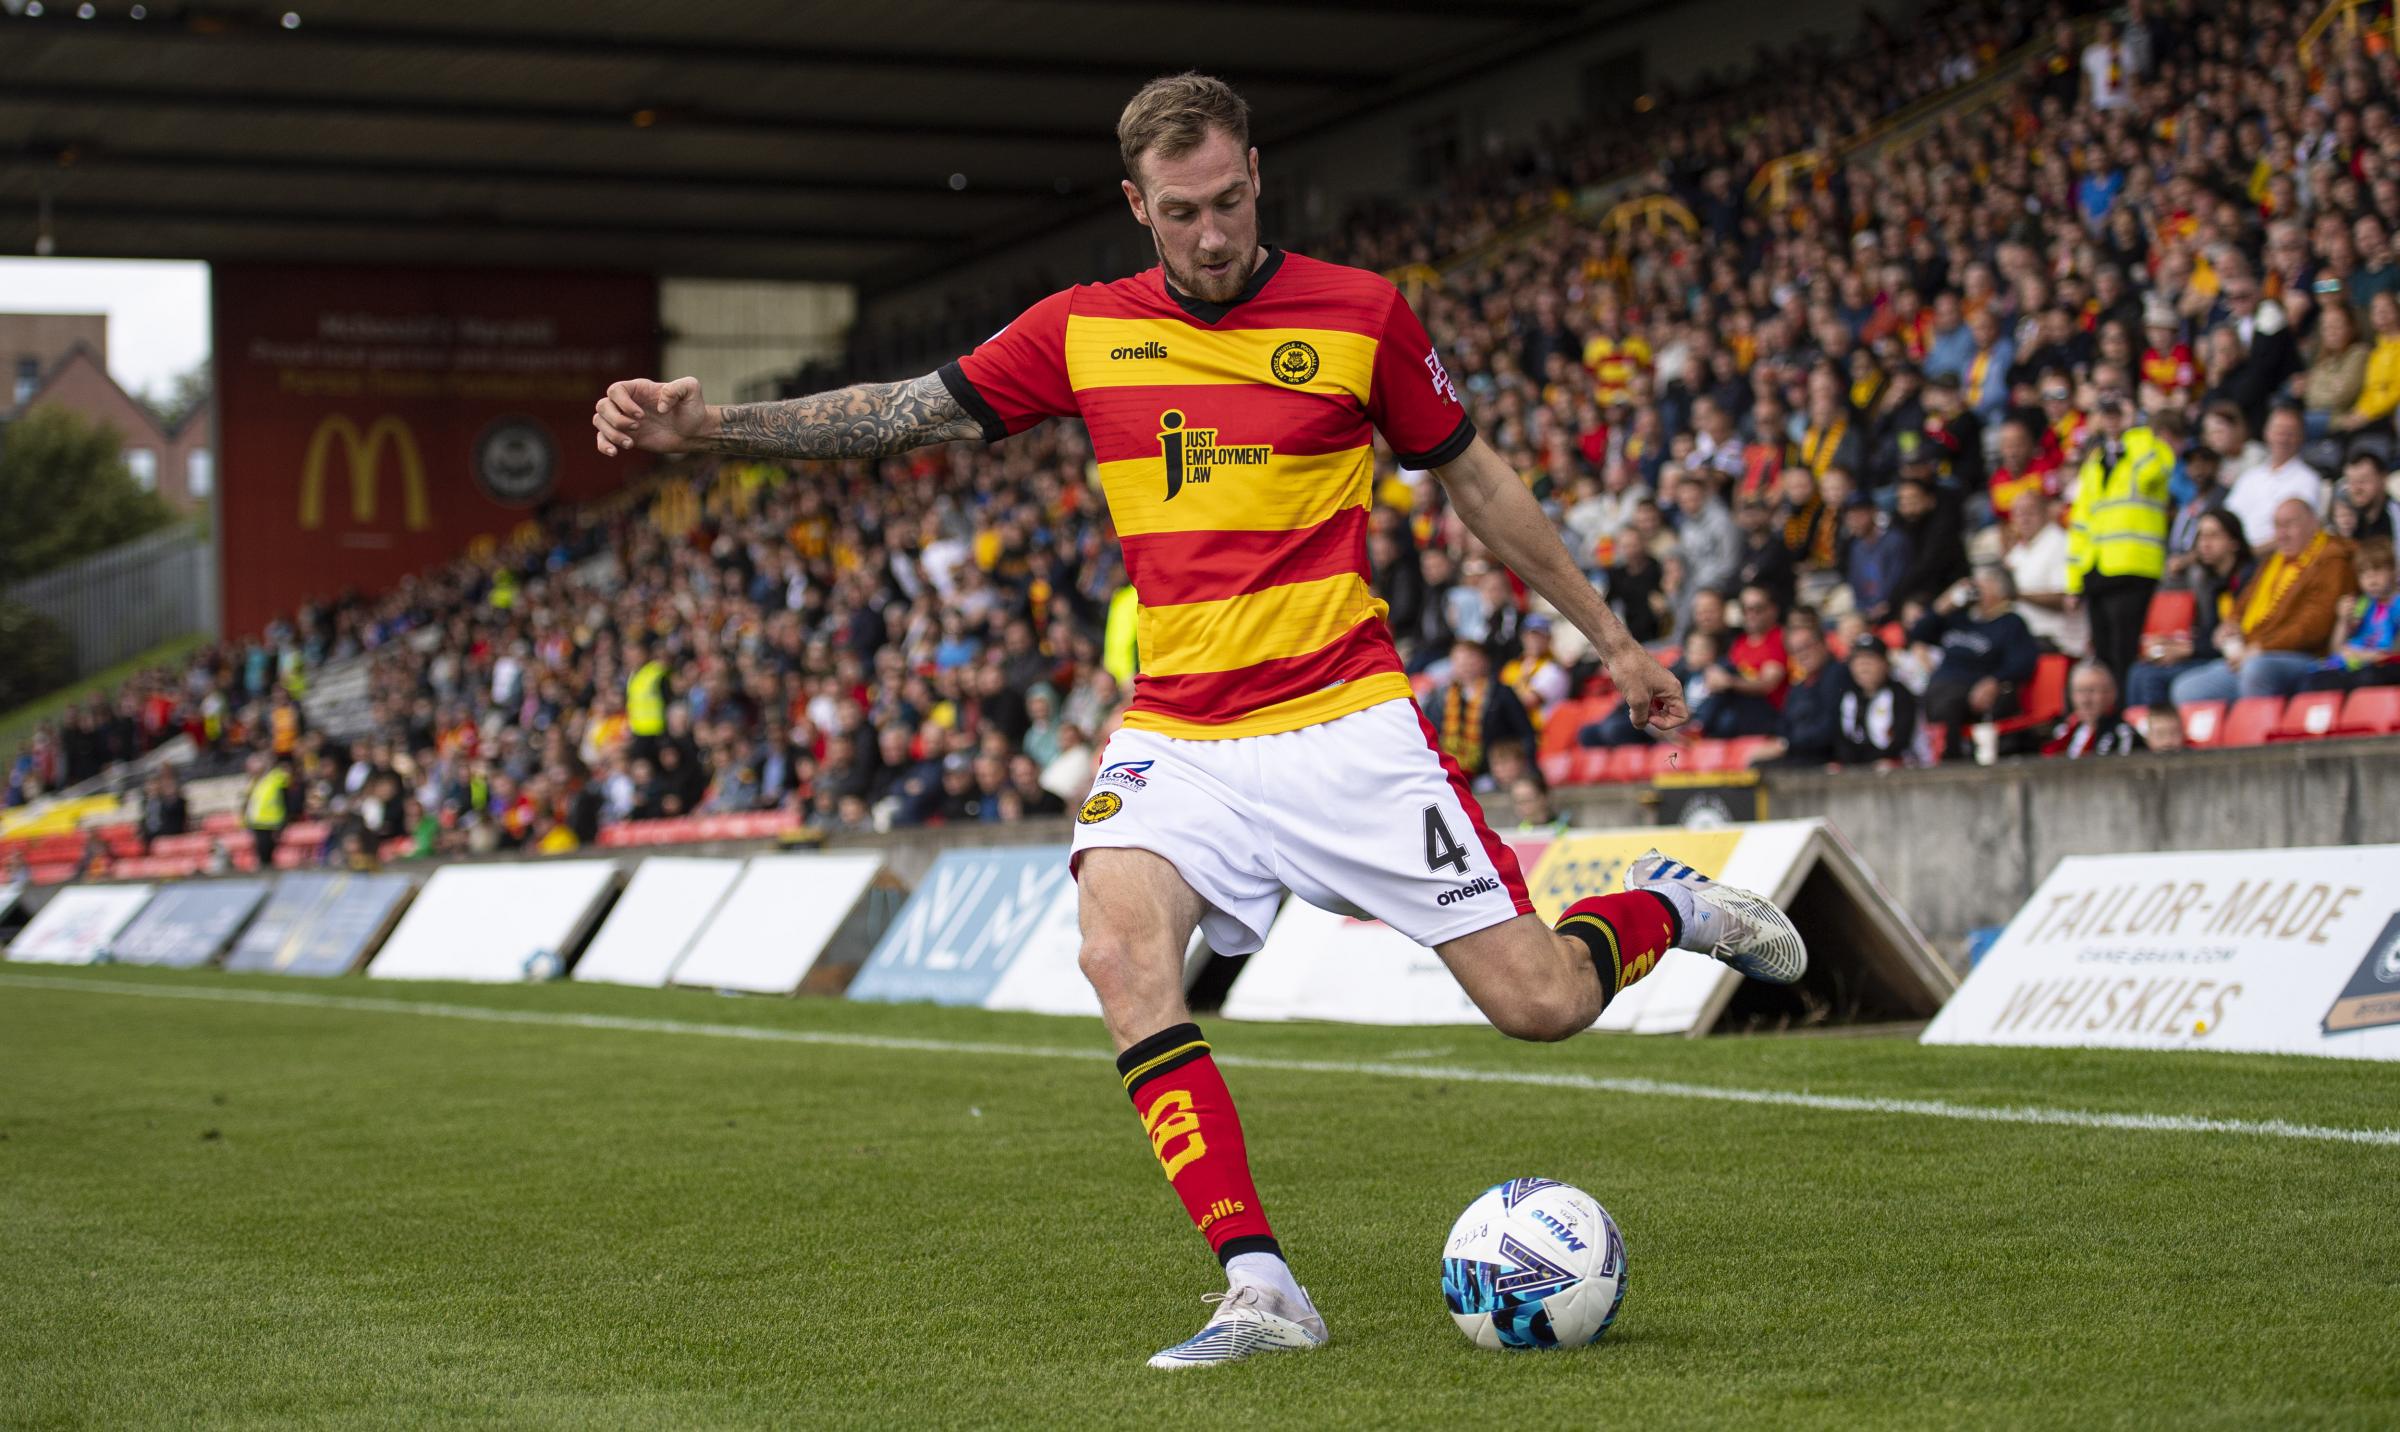 Kevin Holt aiming high as Thistle prepare for Aberdeen quarter-final